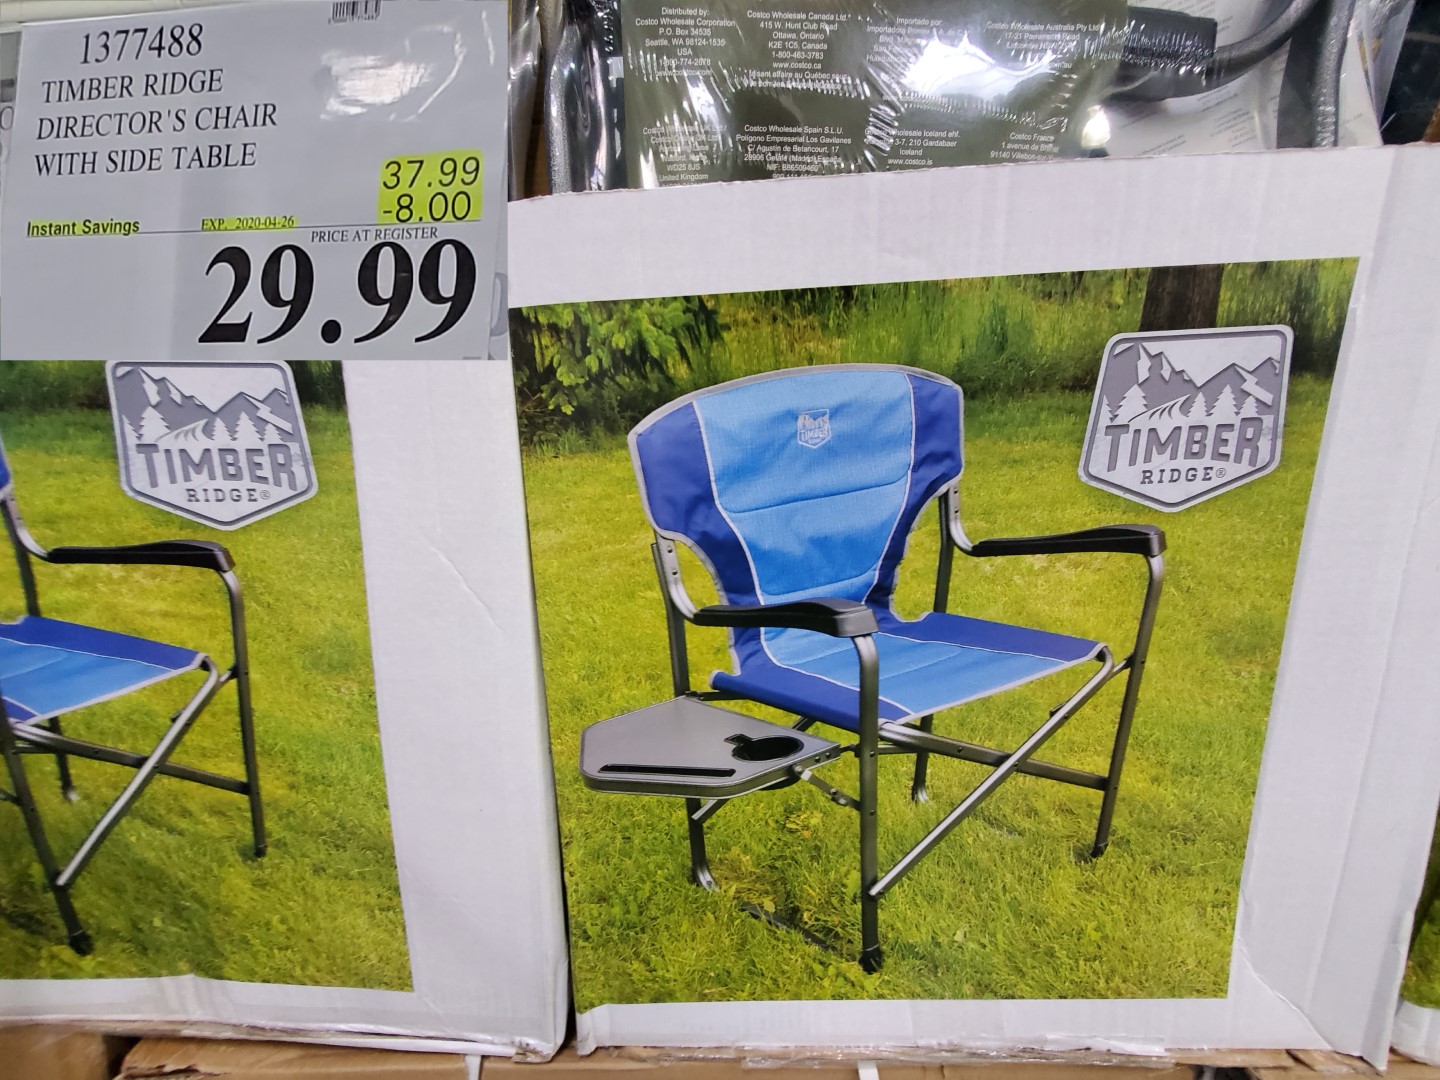 1377488 Timber Ridge Director S Chair, Director S Chair With Side Table Costco